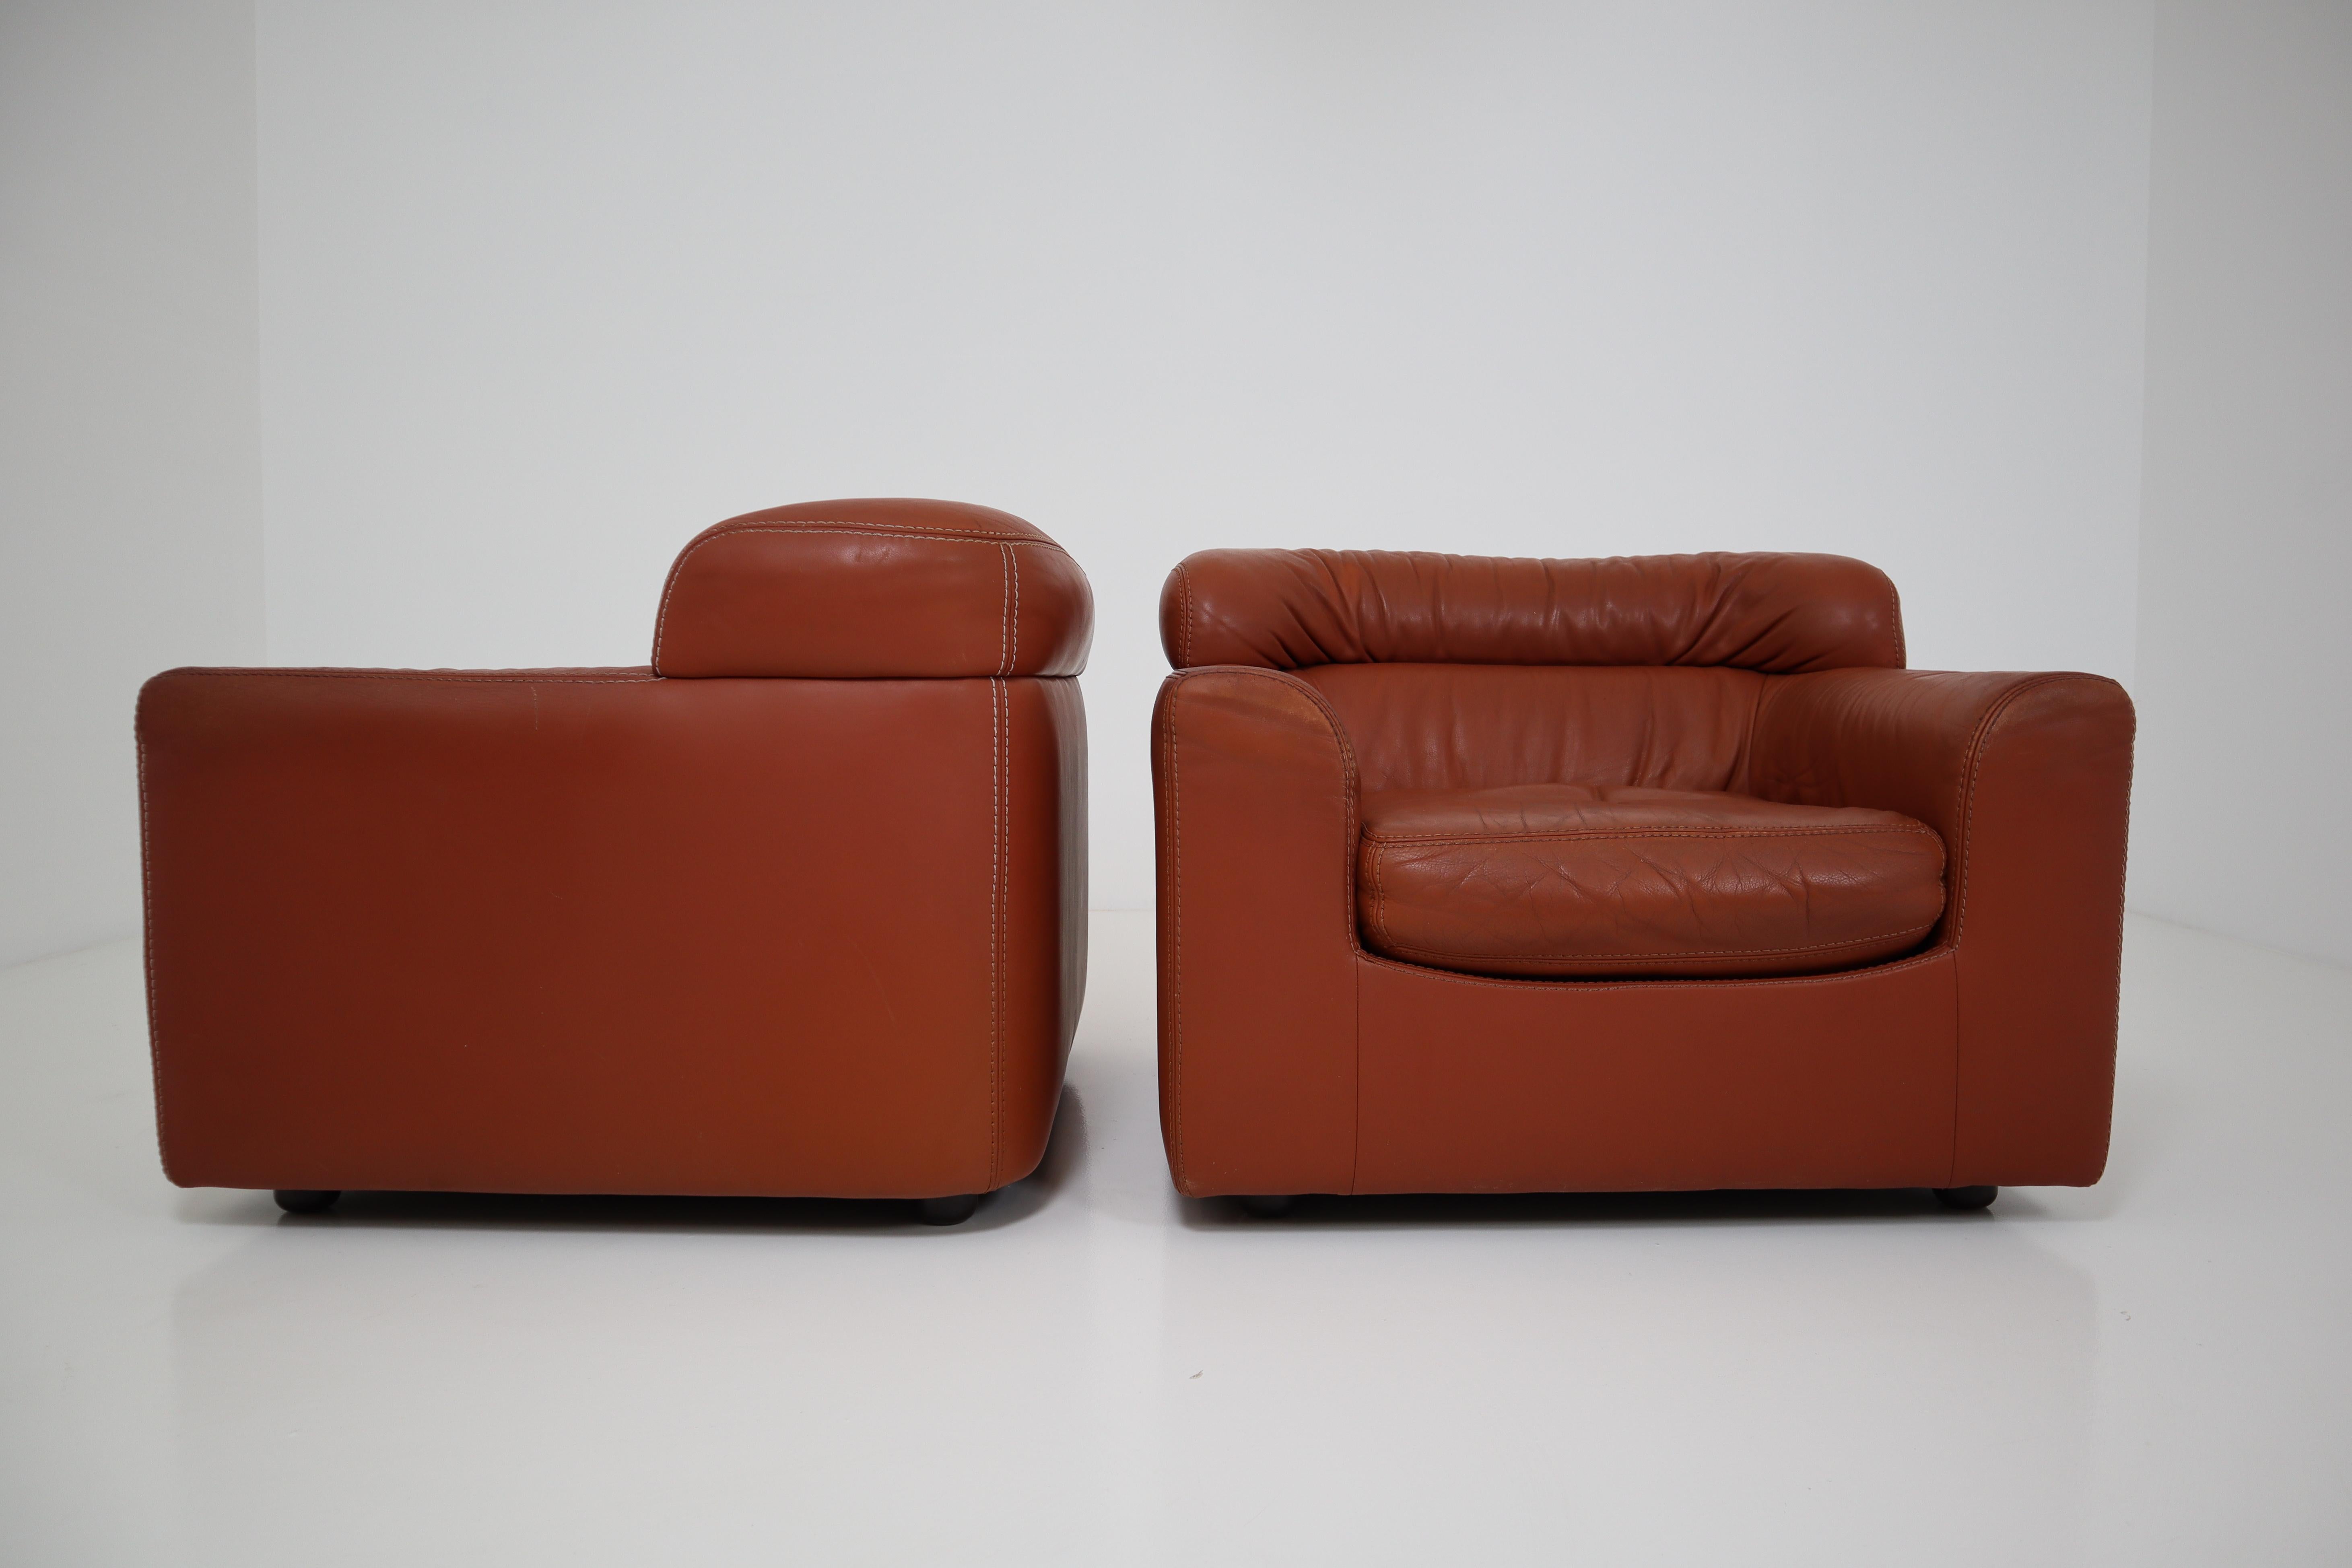 Armchairs by Durlet with striking and elegant proportions. An in-house, design from the mid-1970s, executed in thick buffalo cognac leather. Durlet is a family business specializing in working with leathers (much like De Sede), known for it's